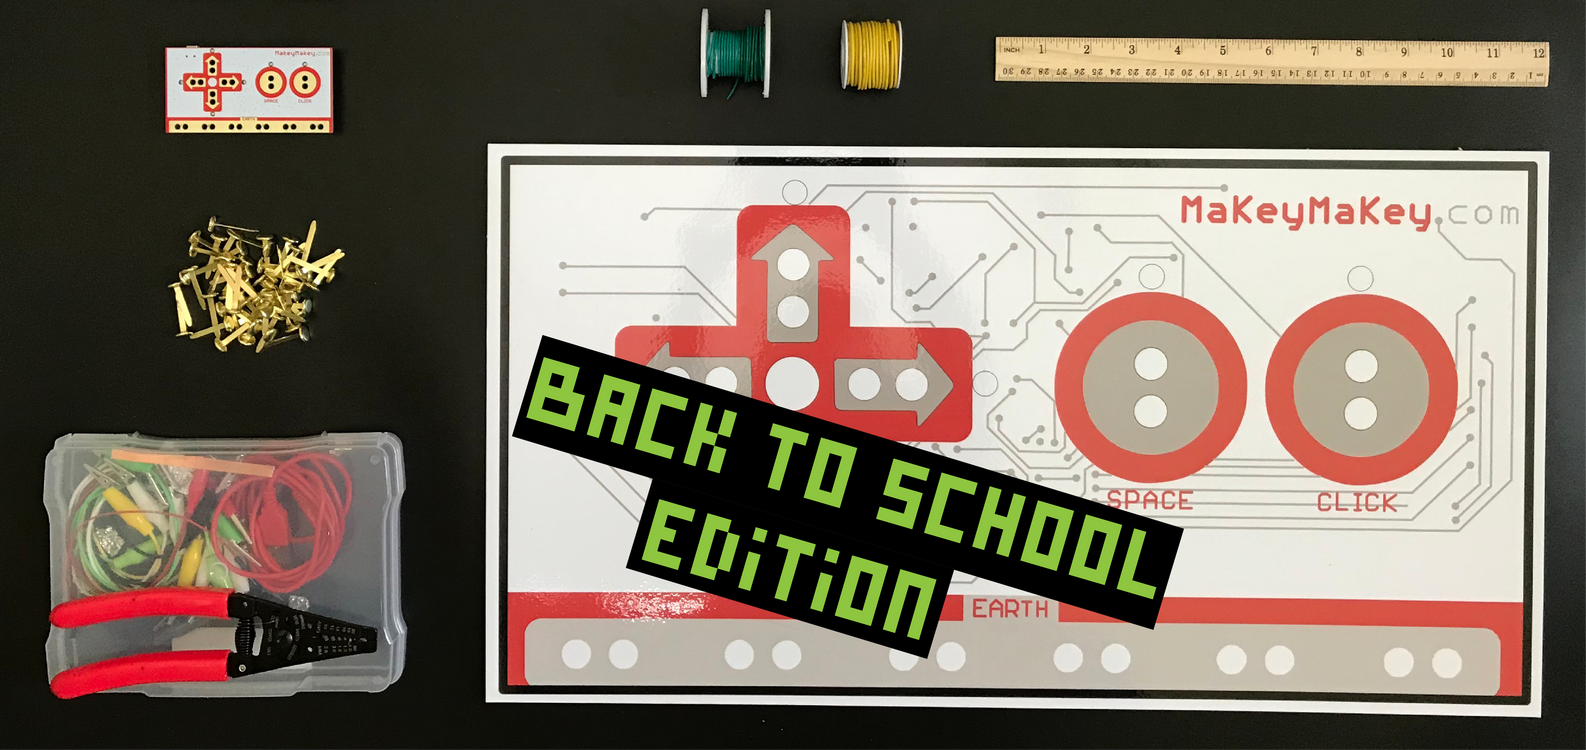 Back to School Ideas! Let's Makey Makey this school year great!